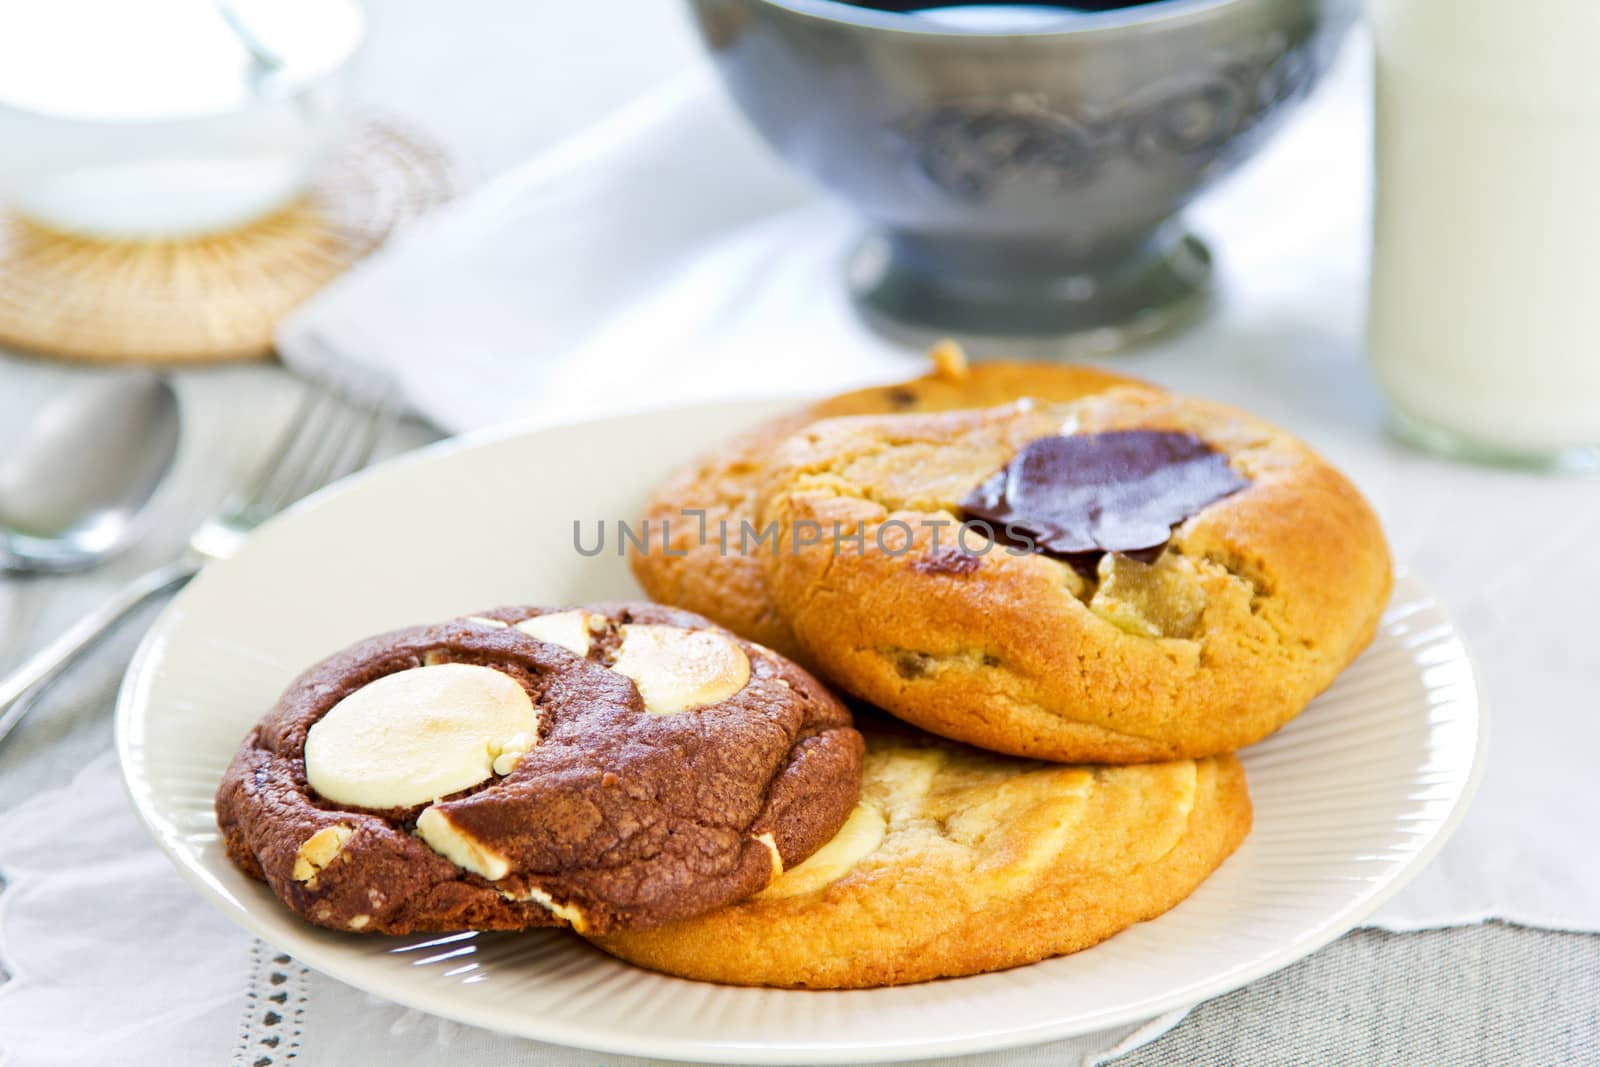 Soft cookies wth chocolate and white chocolate  by vanillaechoes